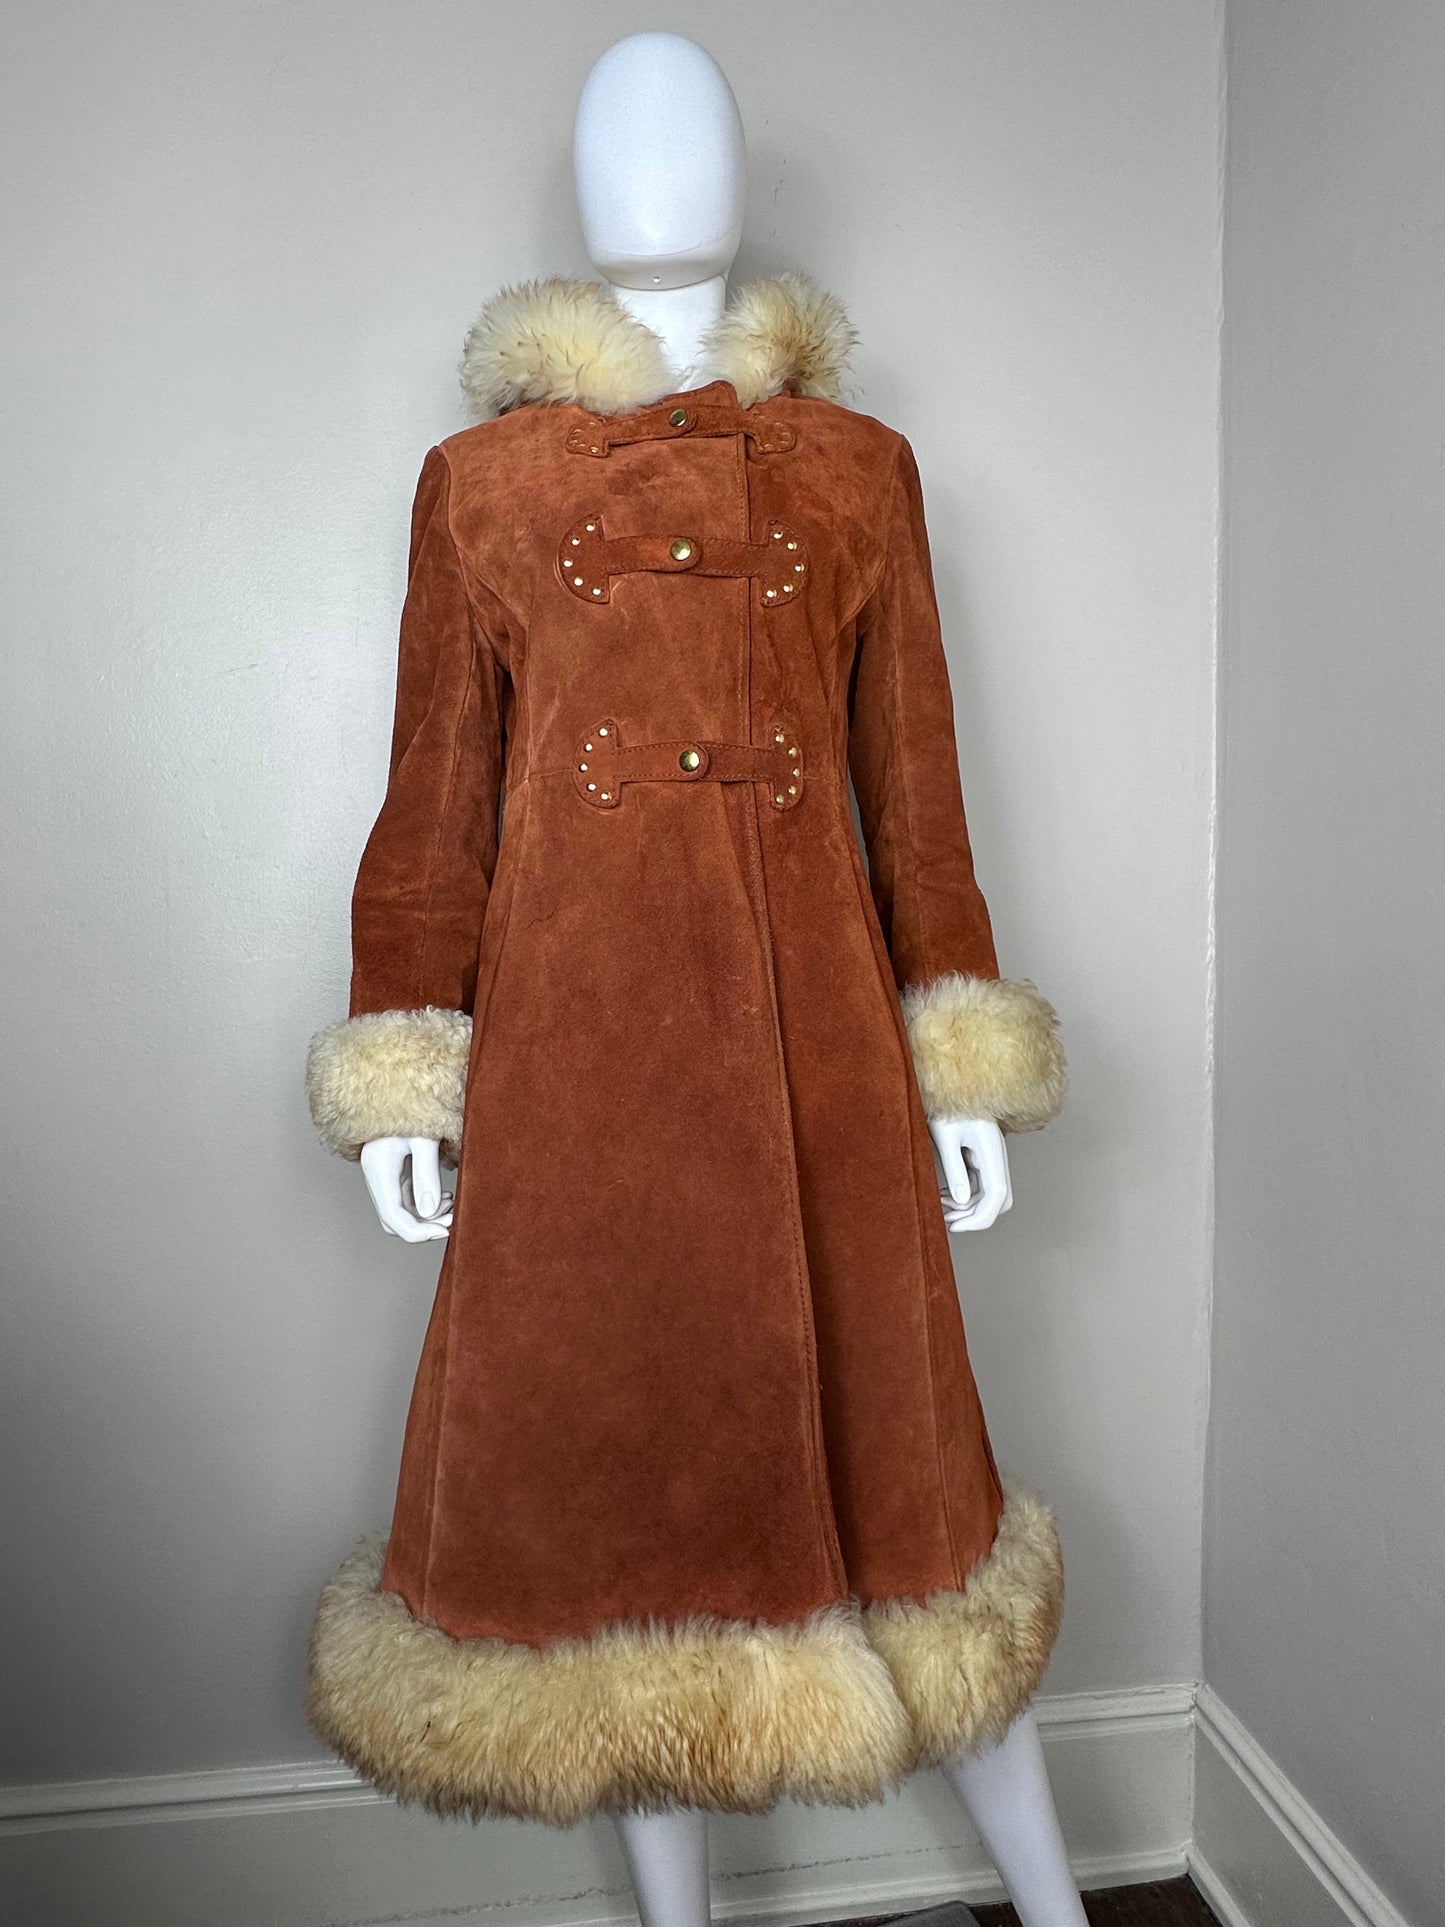 1970s Leather Coat with Lamb Fur Trim, Penny Lane, Irving Posluns Size Small